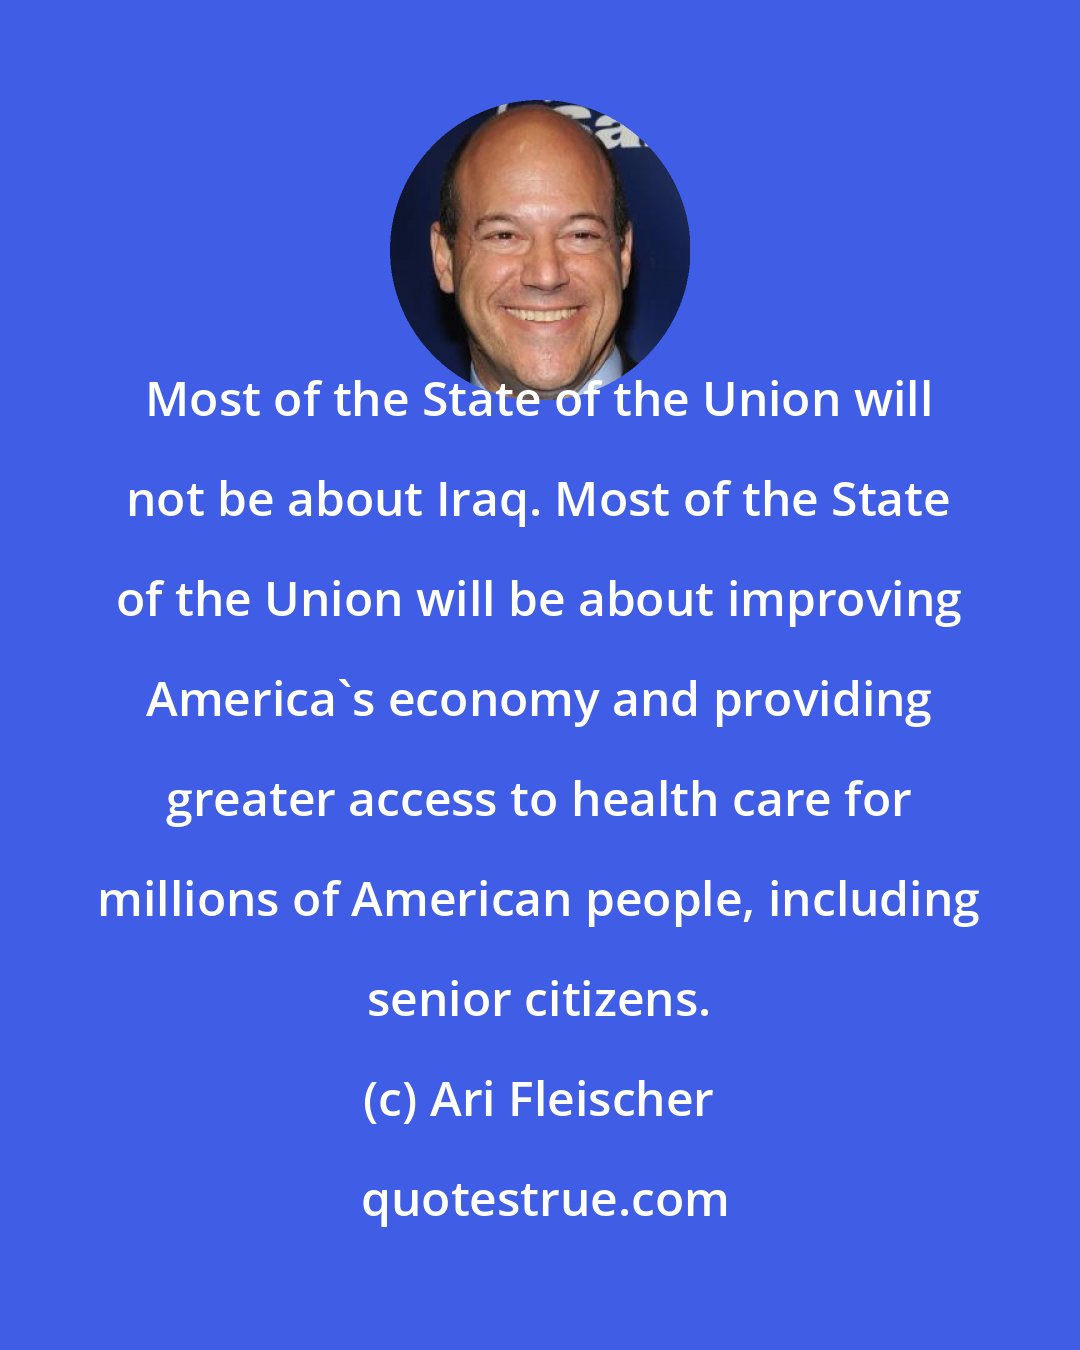 Ari Fleischer: Most of the State of the Union will not be about Iraq. Most of the State of the Union will be about improving America's economy and providing greater access to health care for millions of American people, including senior citizens.